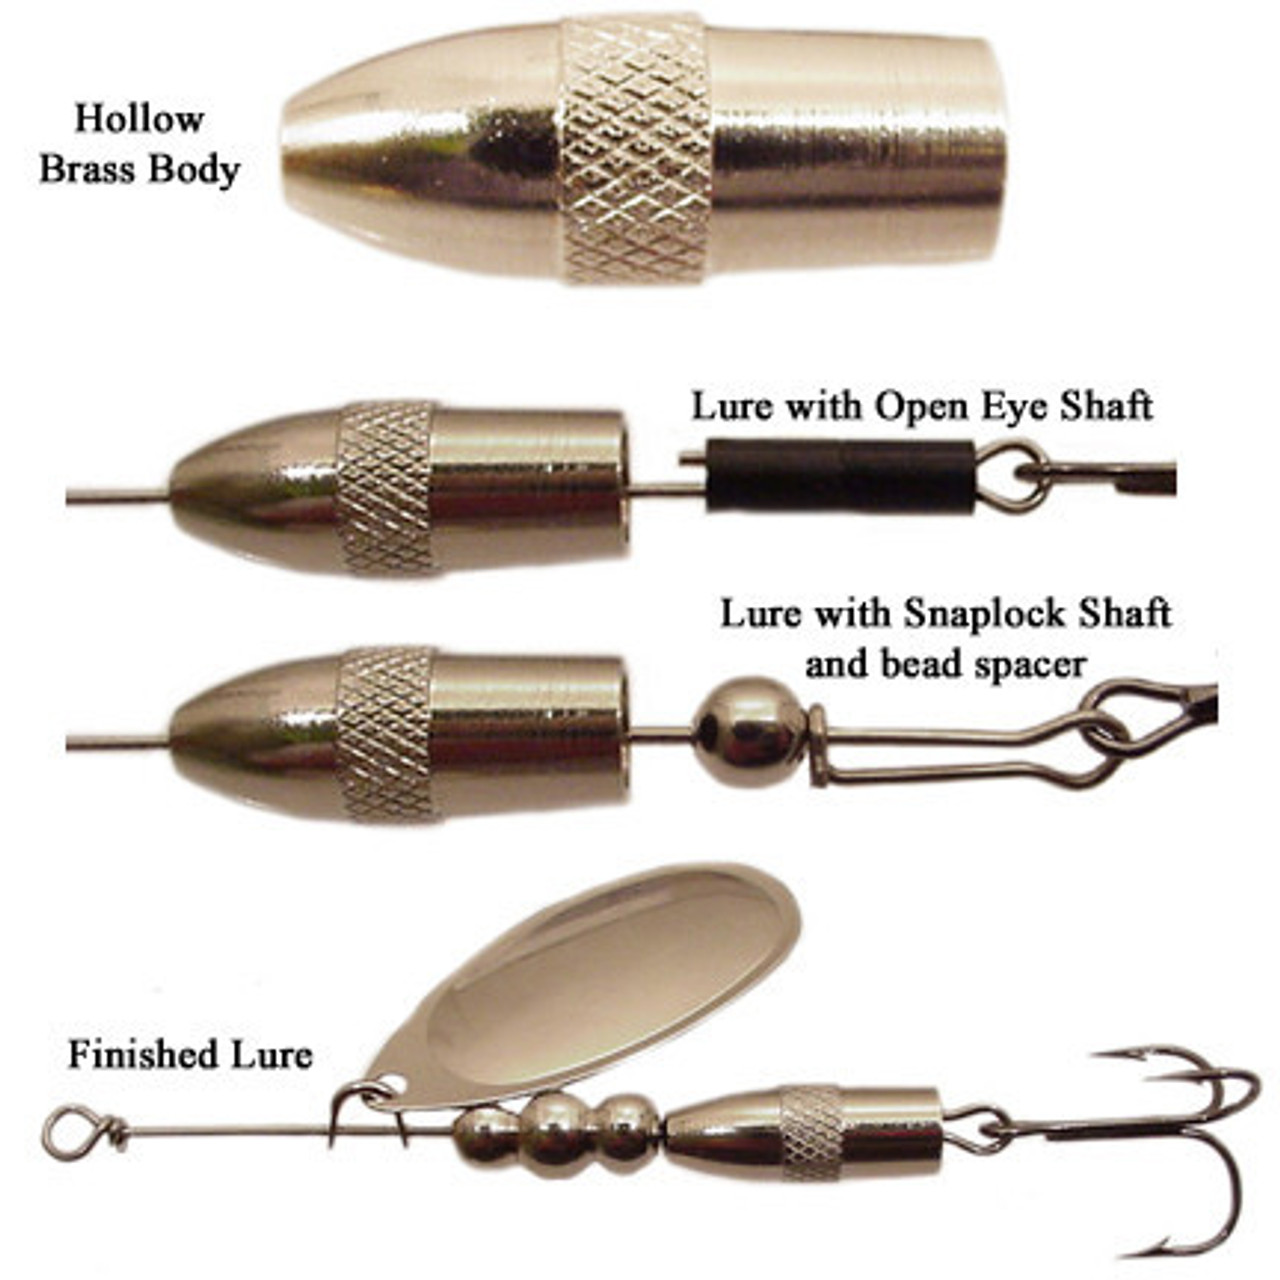 Hollow Brass Lure Bodies - Barlow's Tackle